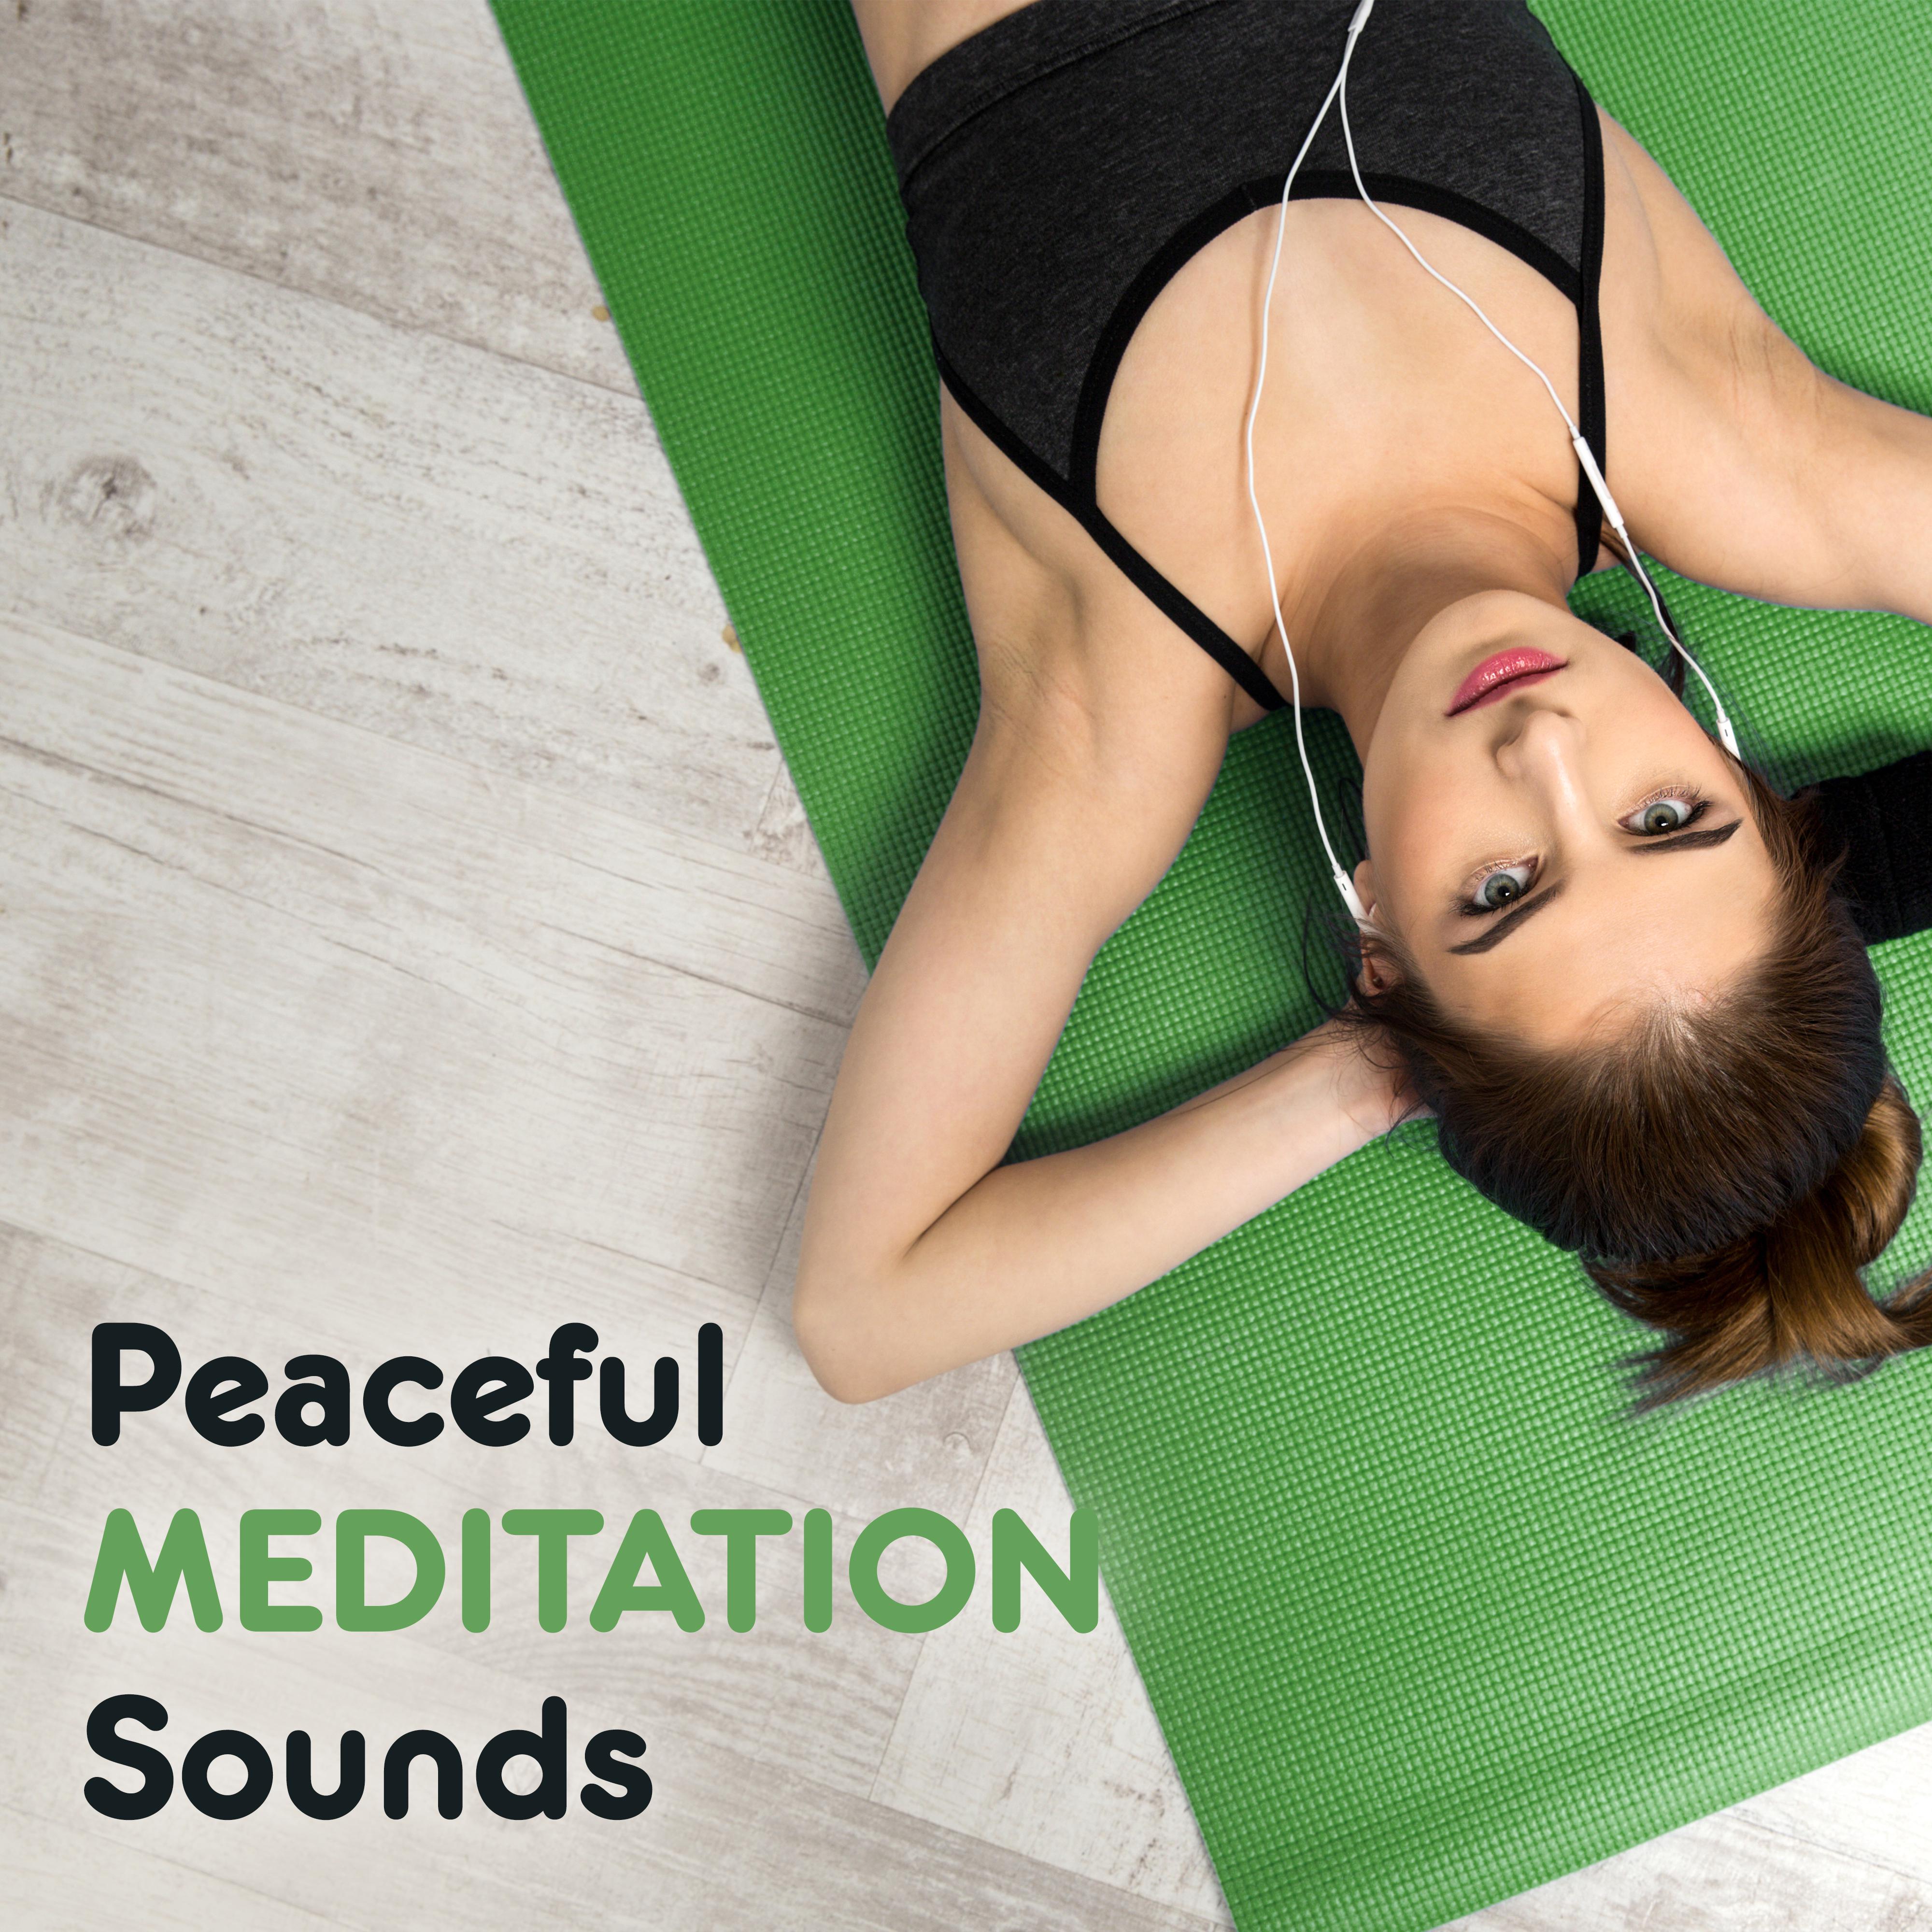 Peaceful Meditation Sounds  Relaxing New Age Music, Sounds to Rest, Mind Control, Spirit Harmony